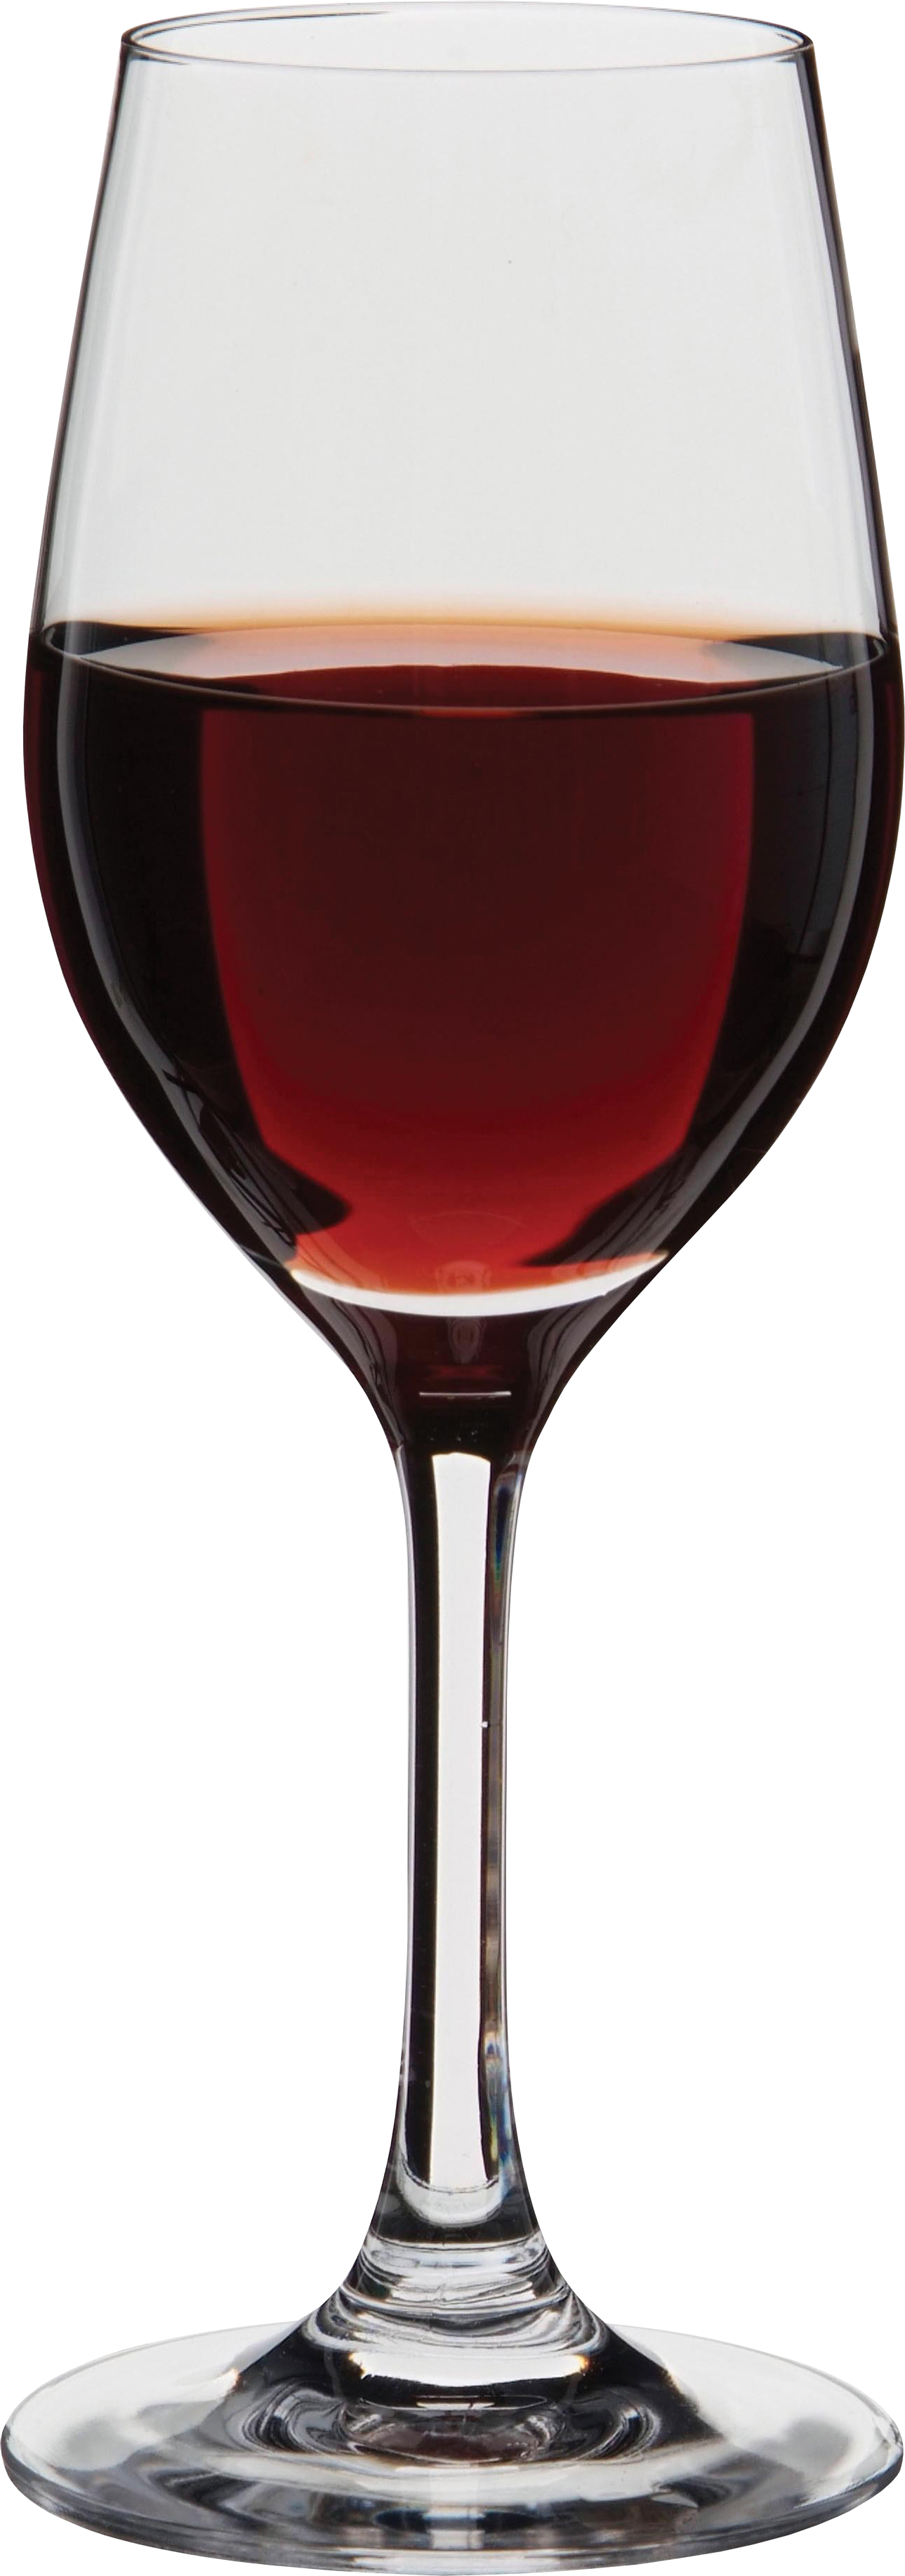 PNG Glass Of Wine - 53111